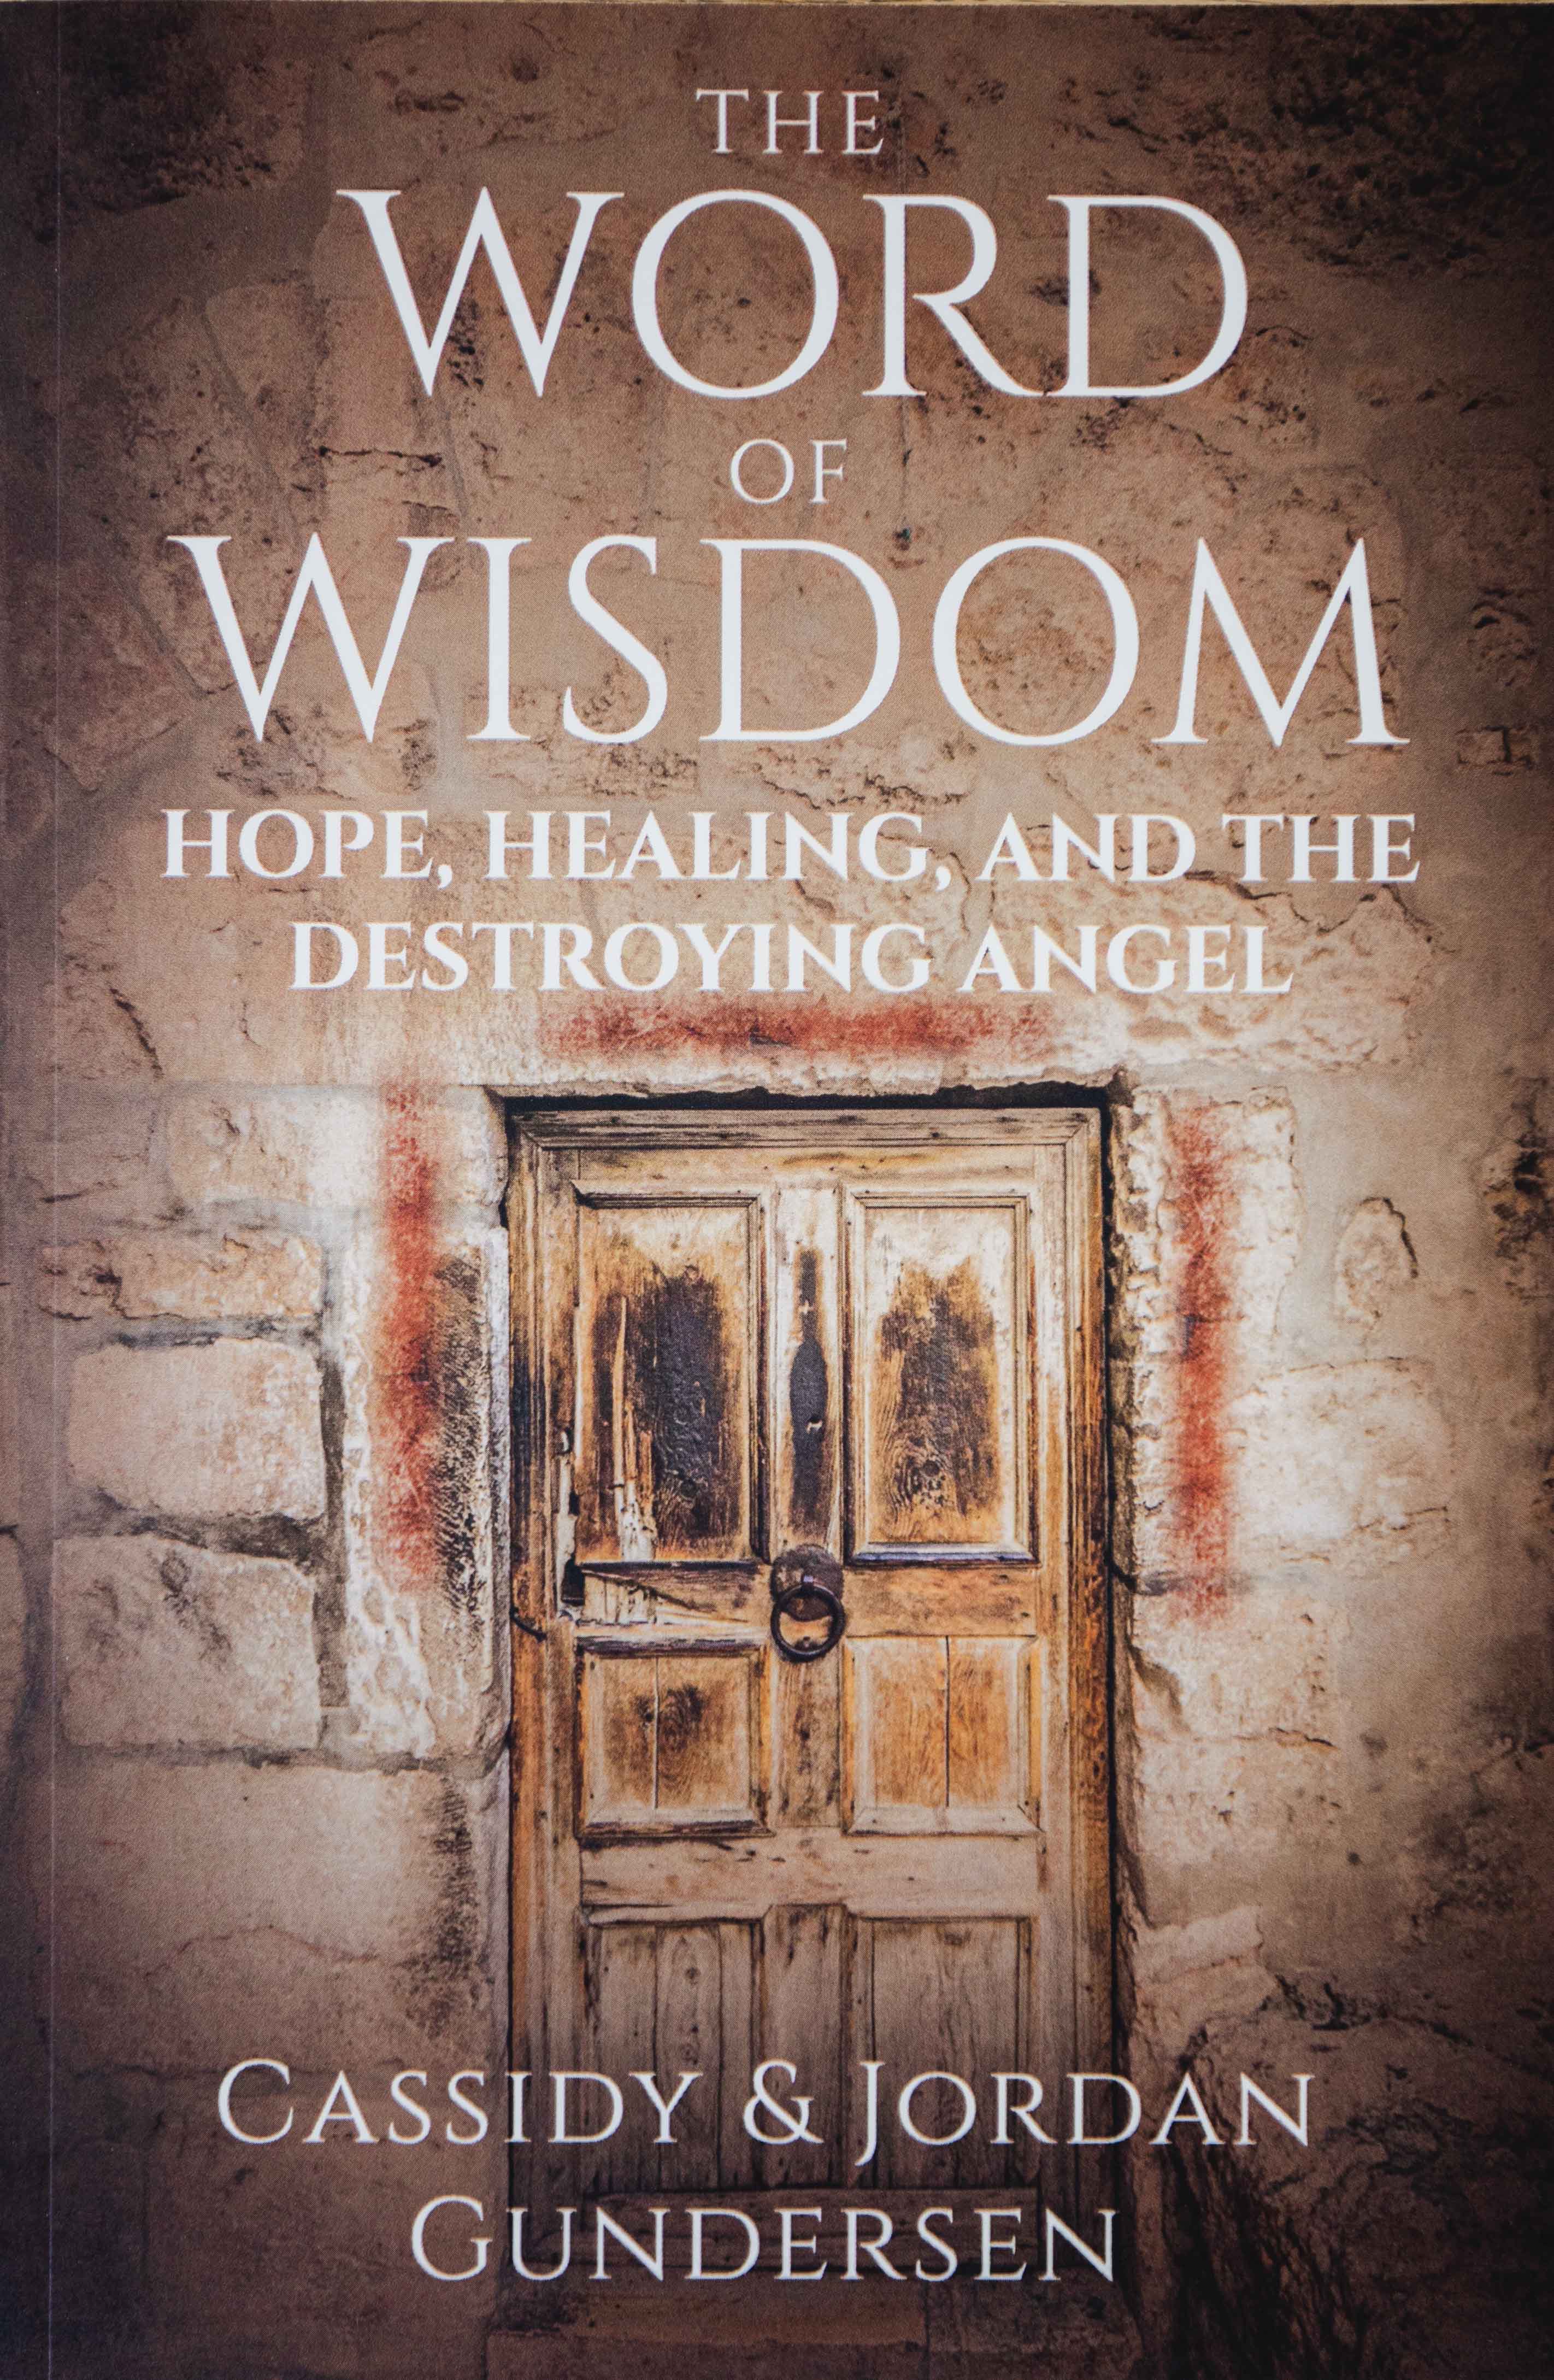 Picture of The Word of Wisdom book